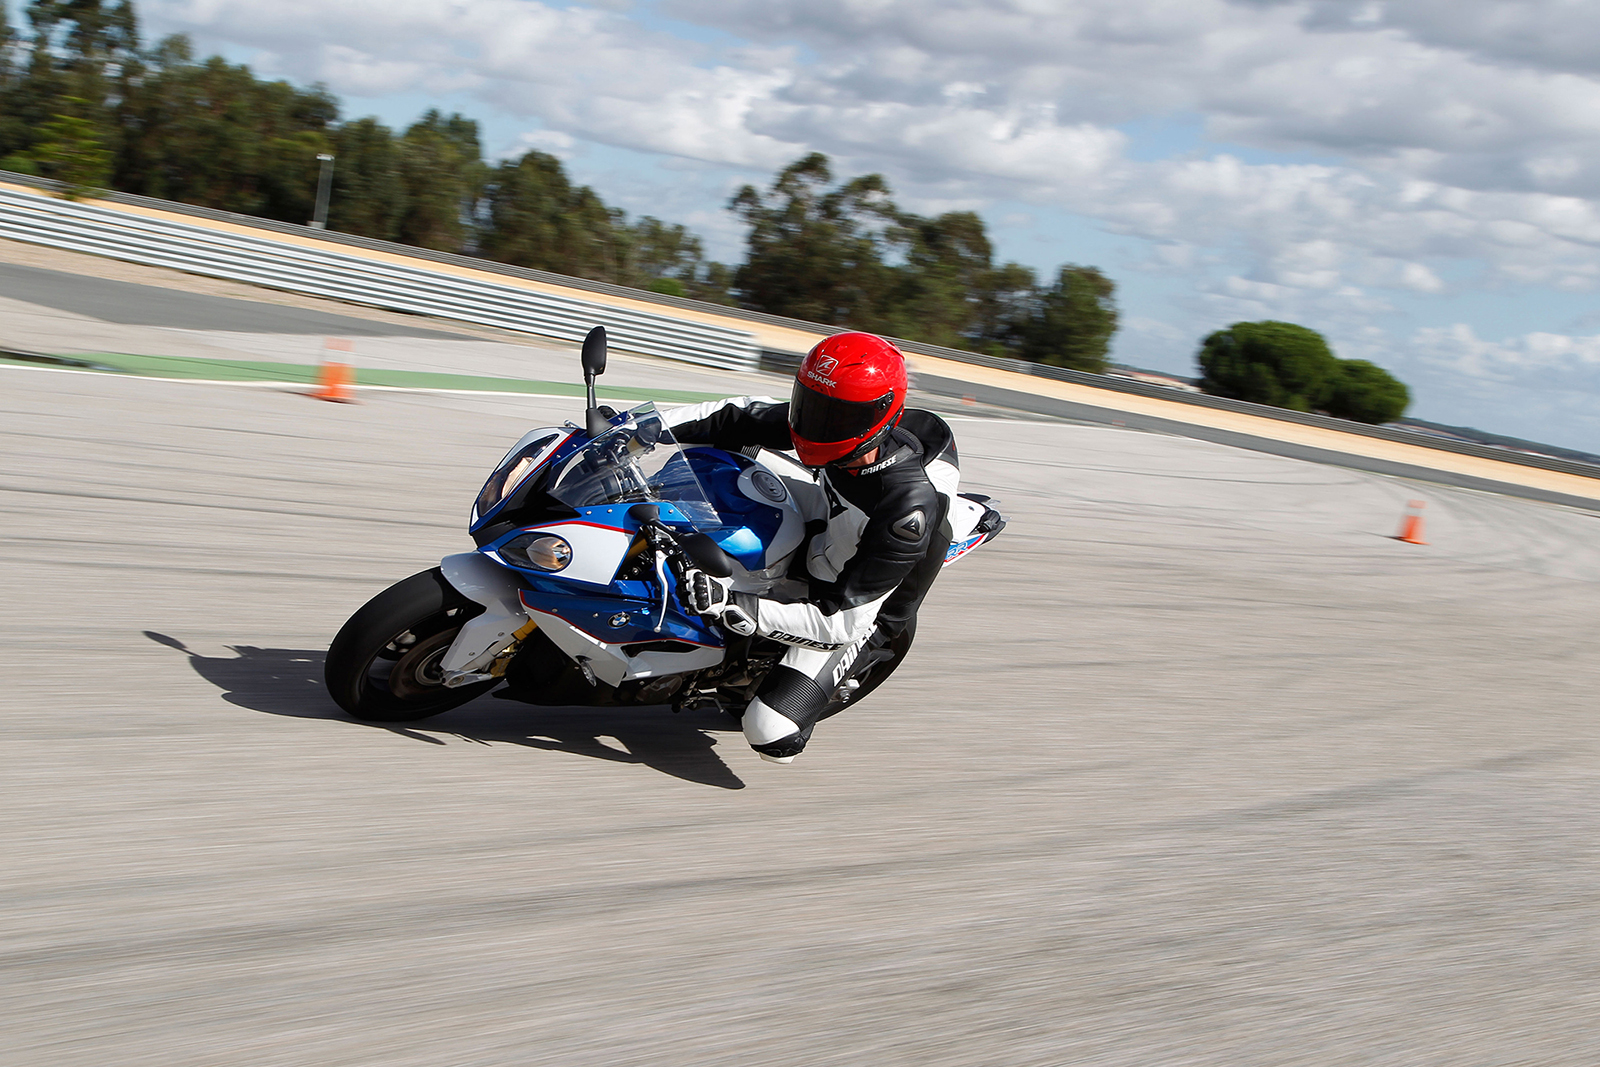 BMW offers retro-fit cornering ABS for S1000RR